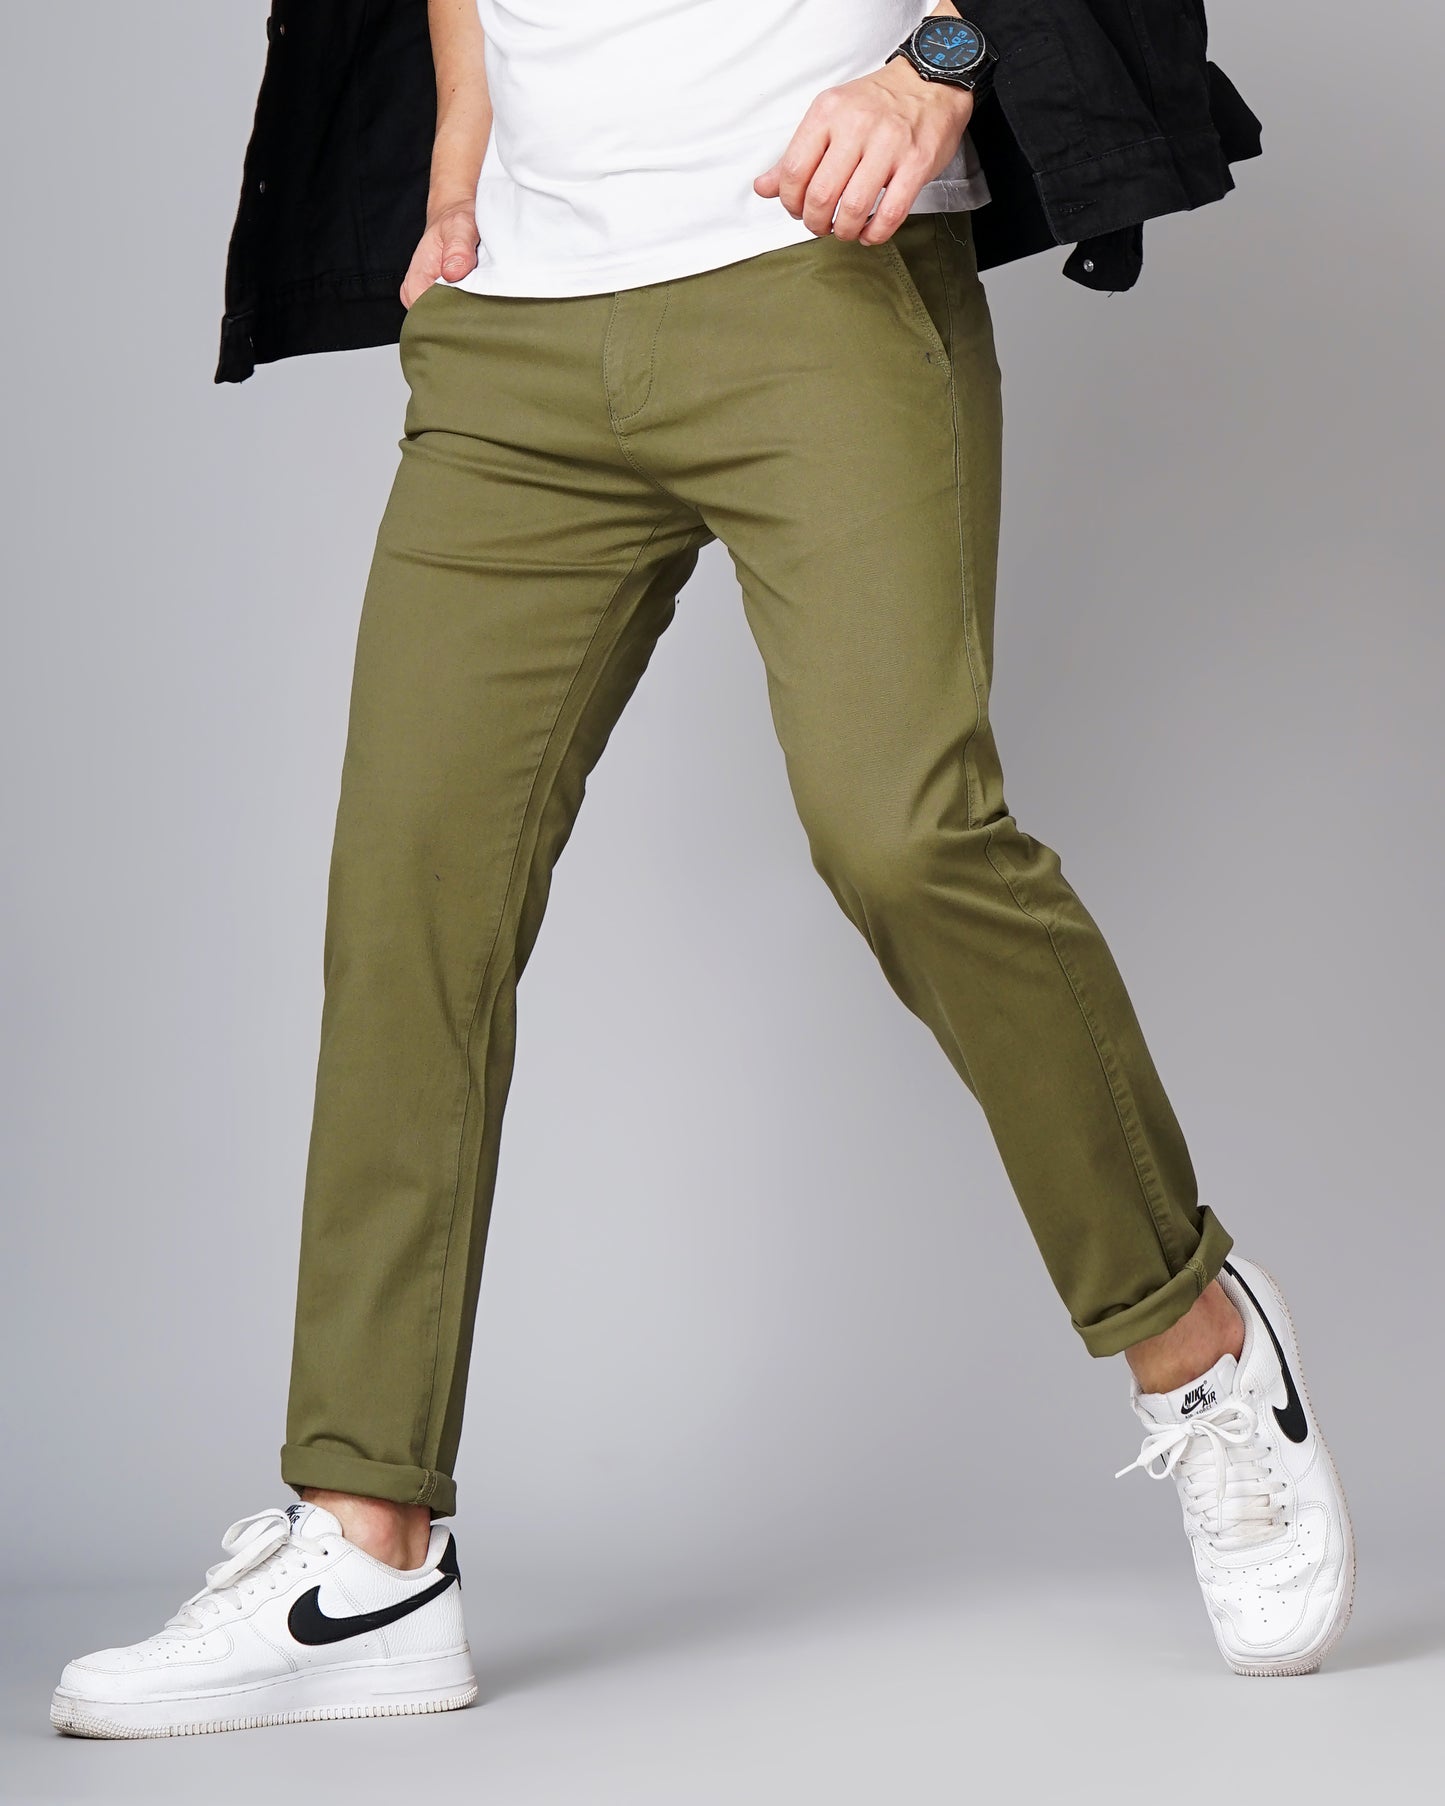 Solid Green Chinos